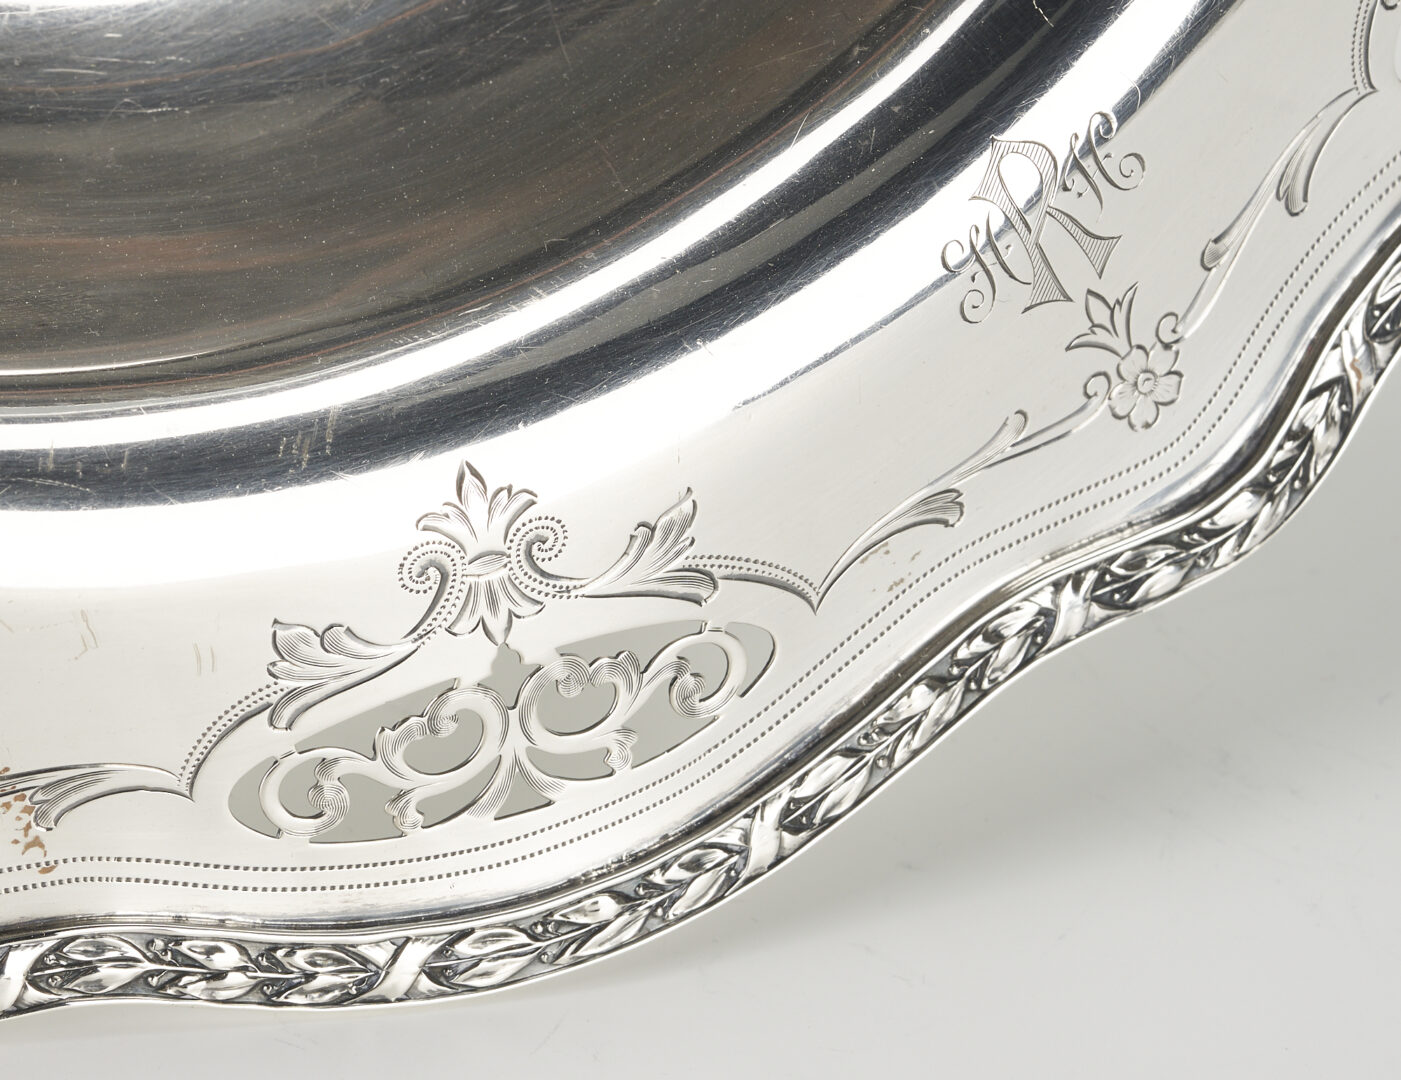 Lot 1094: Wallace Sterling Silver Footed Centerpiece Bowl w/ Reticulated Rim